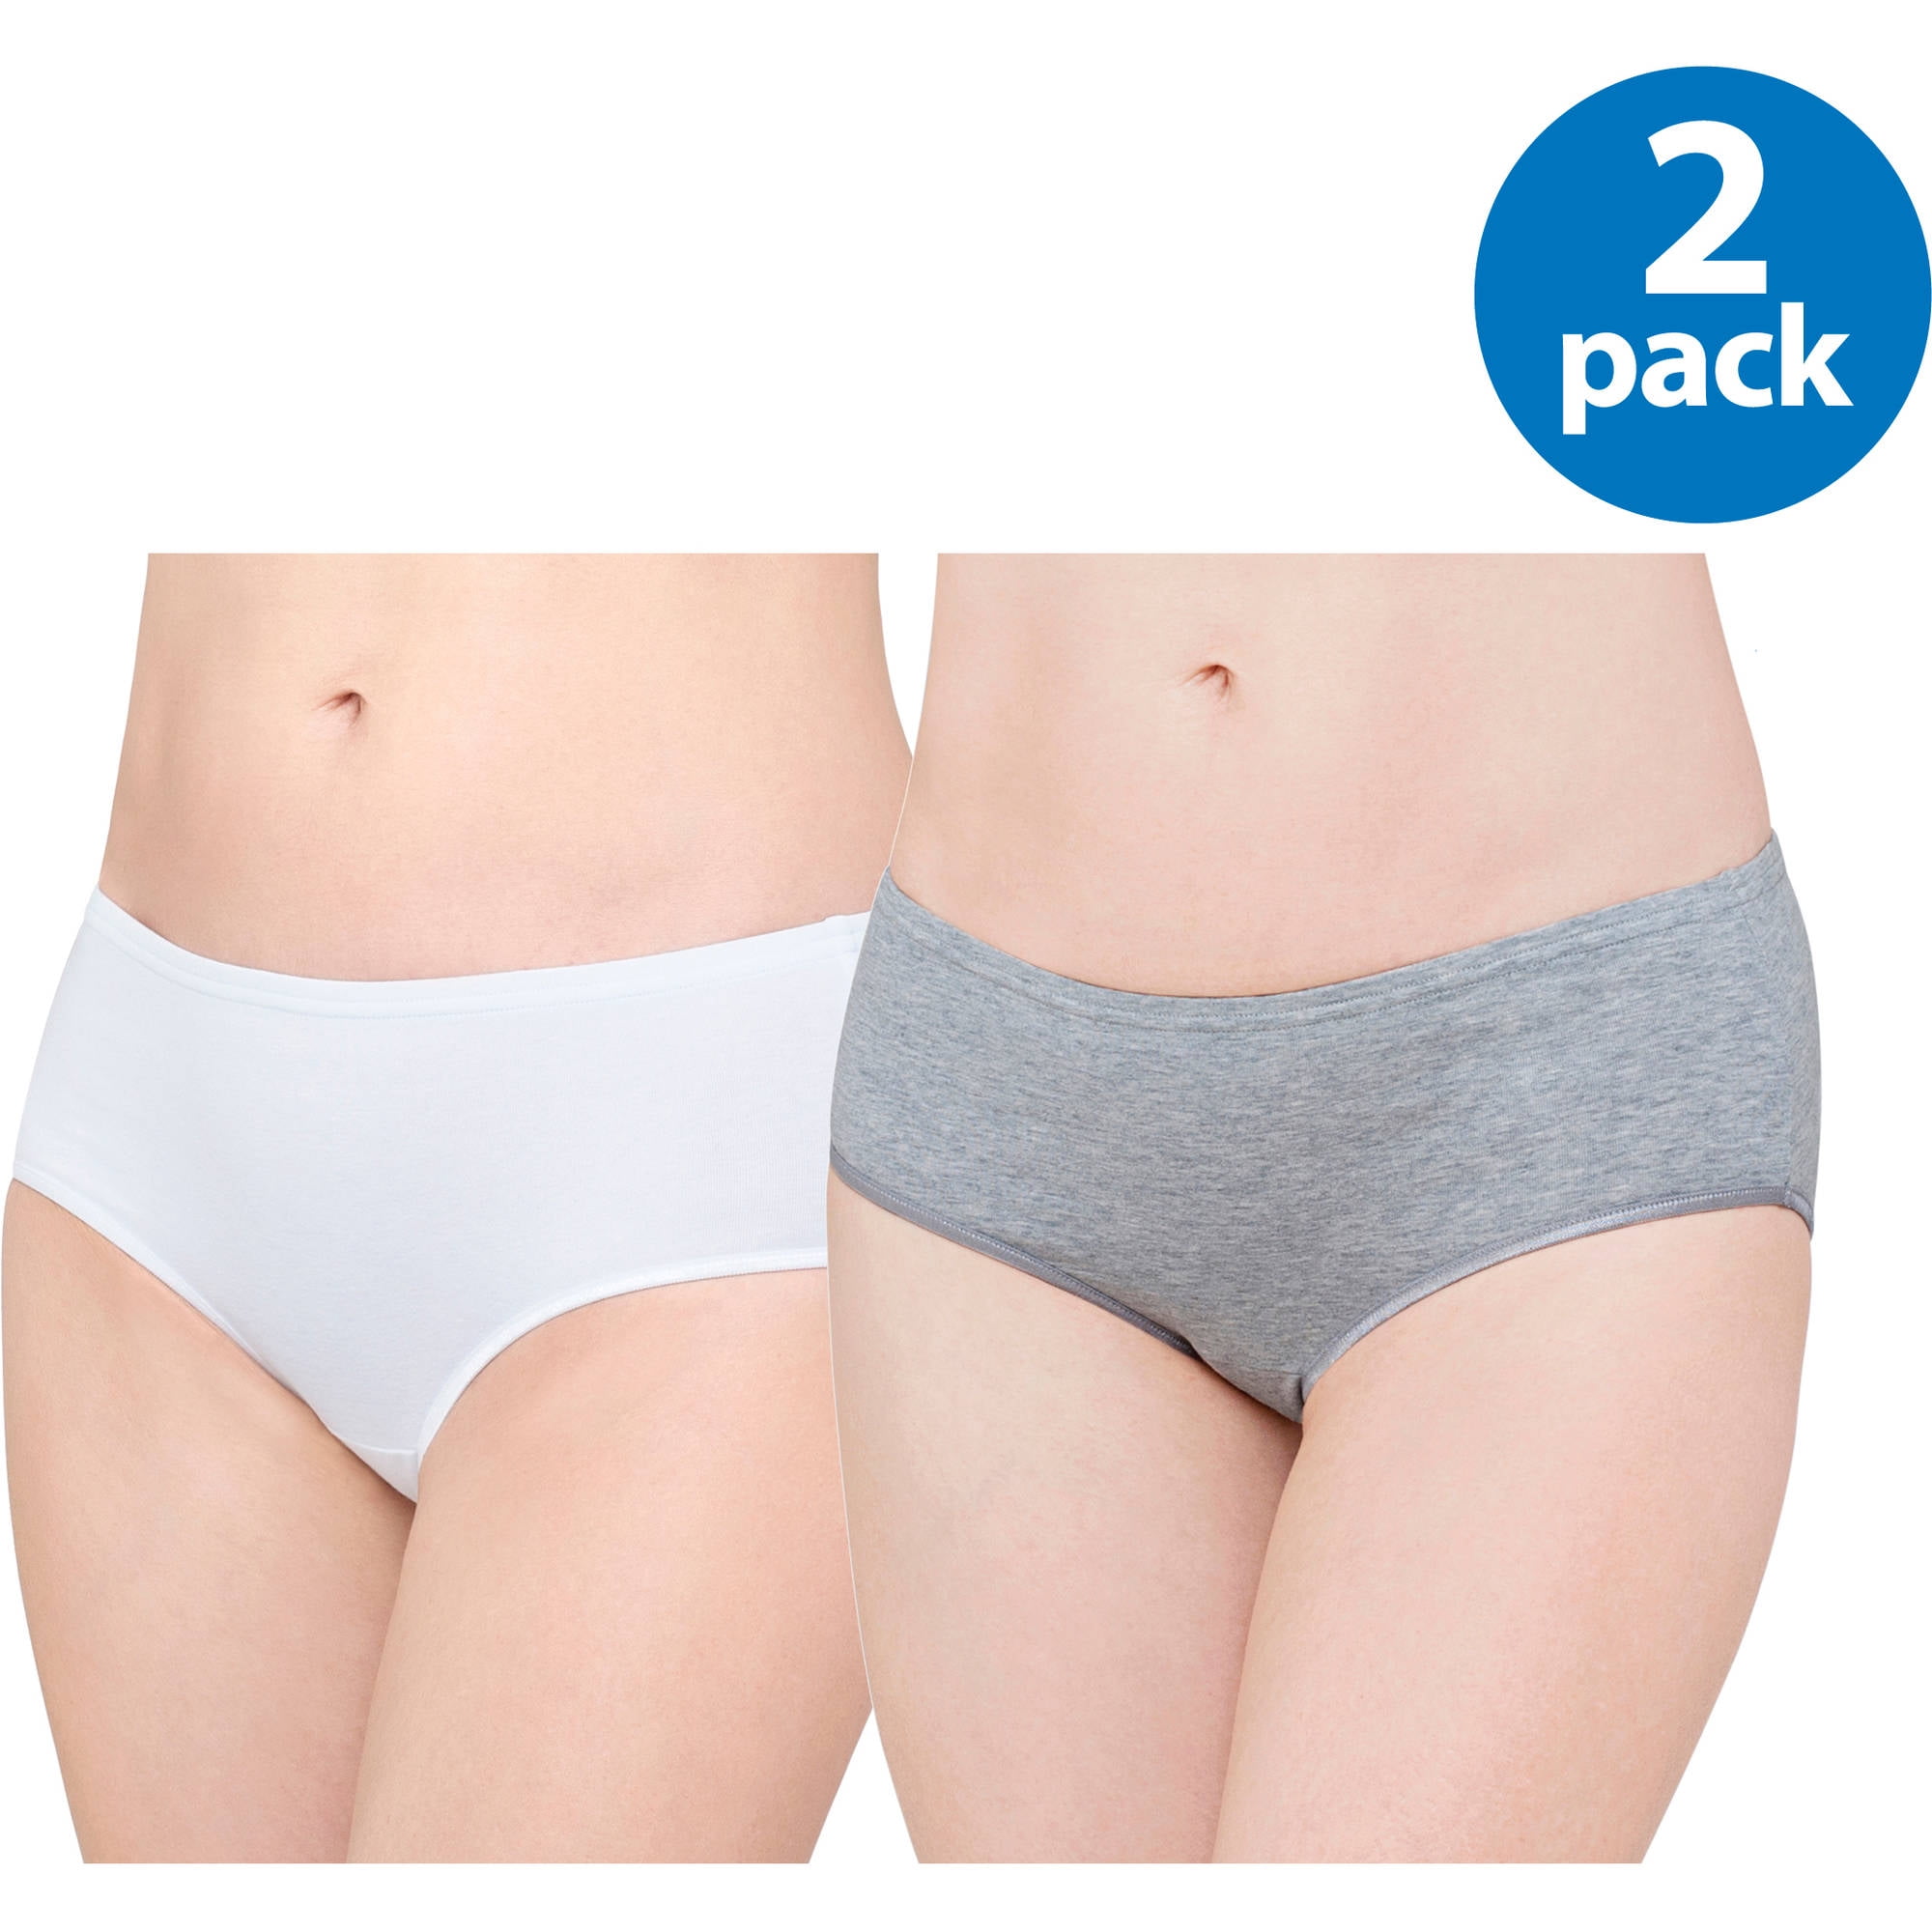 THE BEST FITTING PANTY IN THE WORLD HIPSTER WHITE COTTON STRETCH S / 5